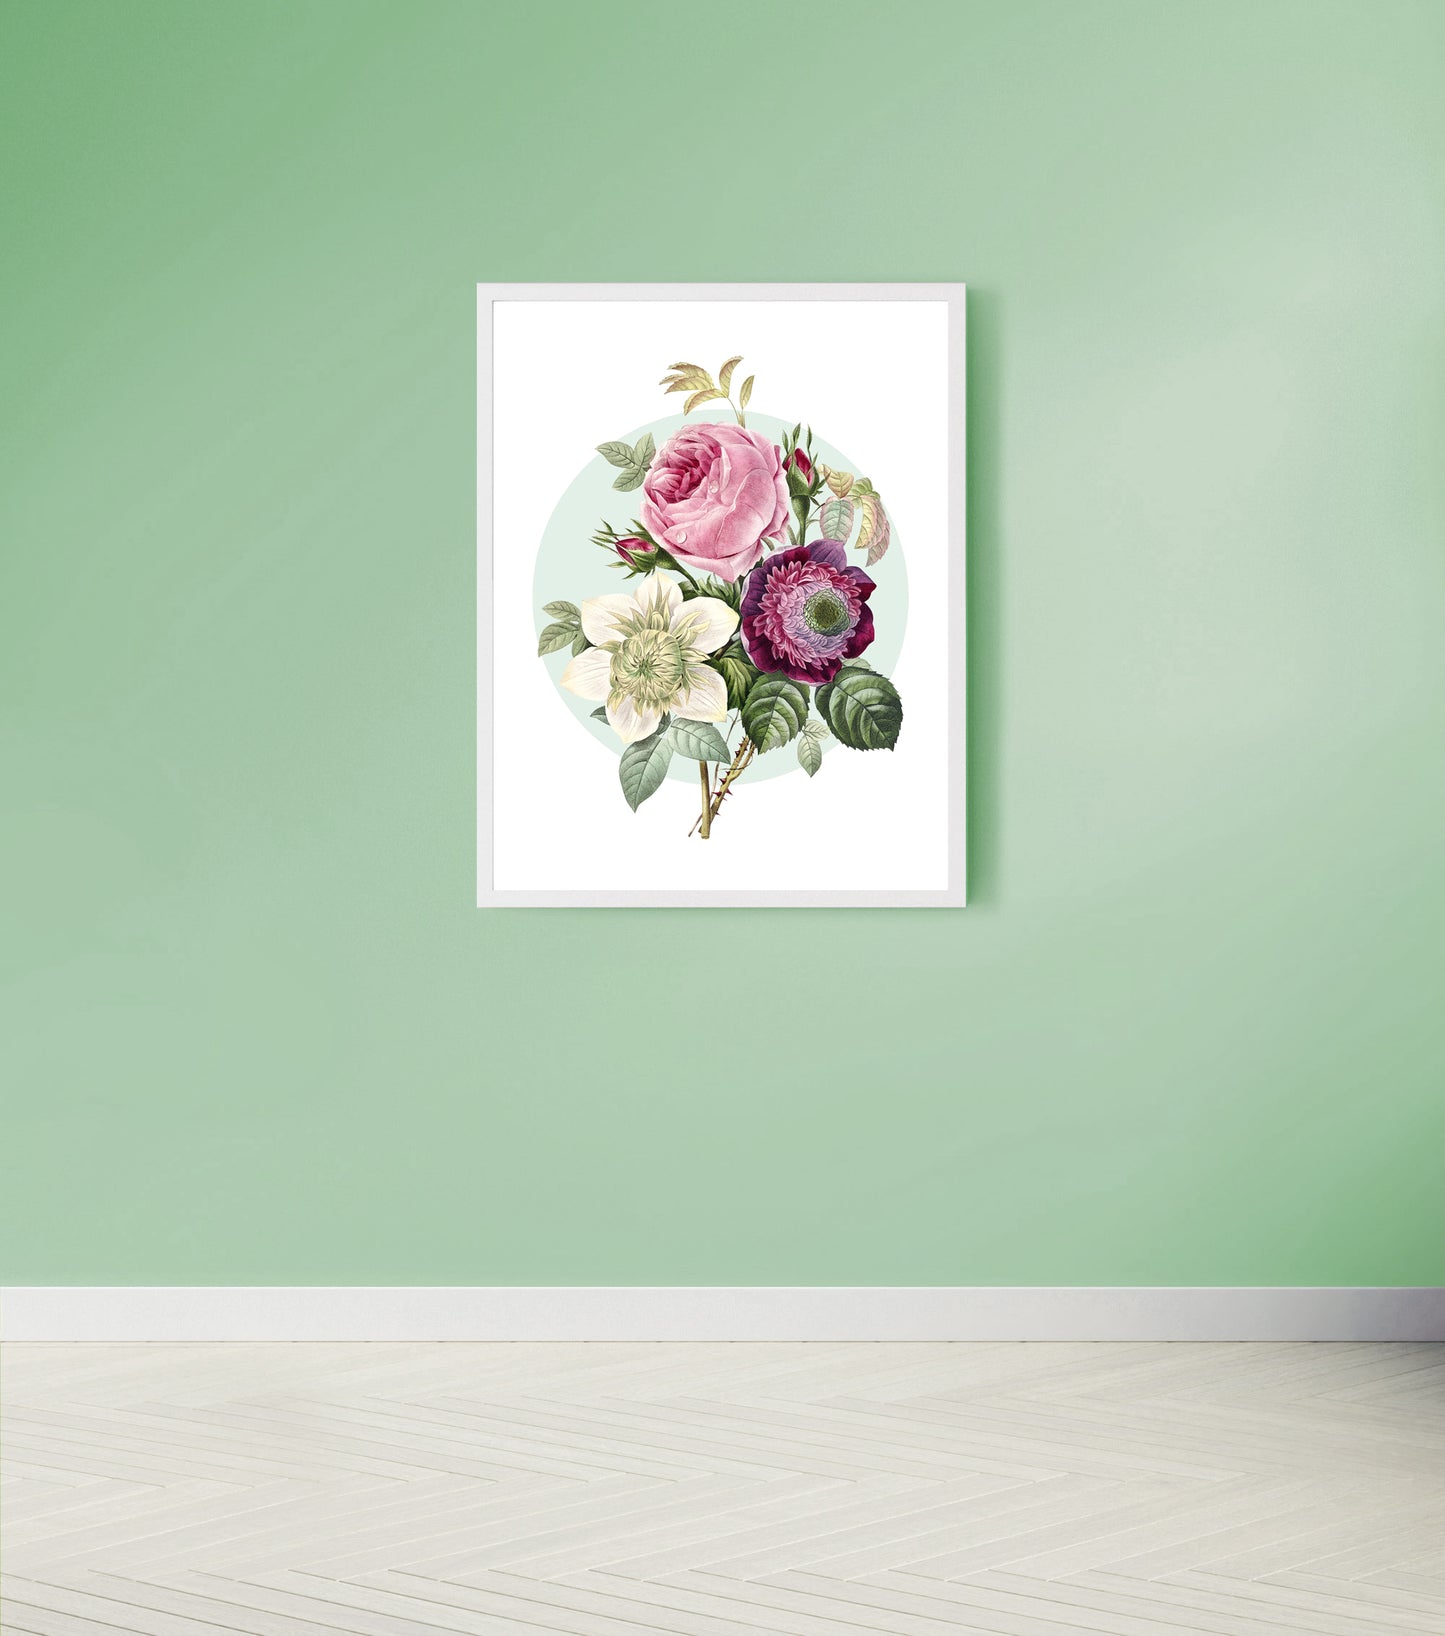 Vintage rose and anemone bouquet print